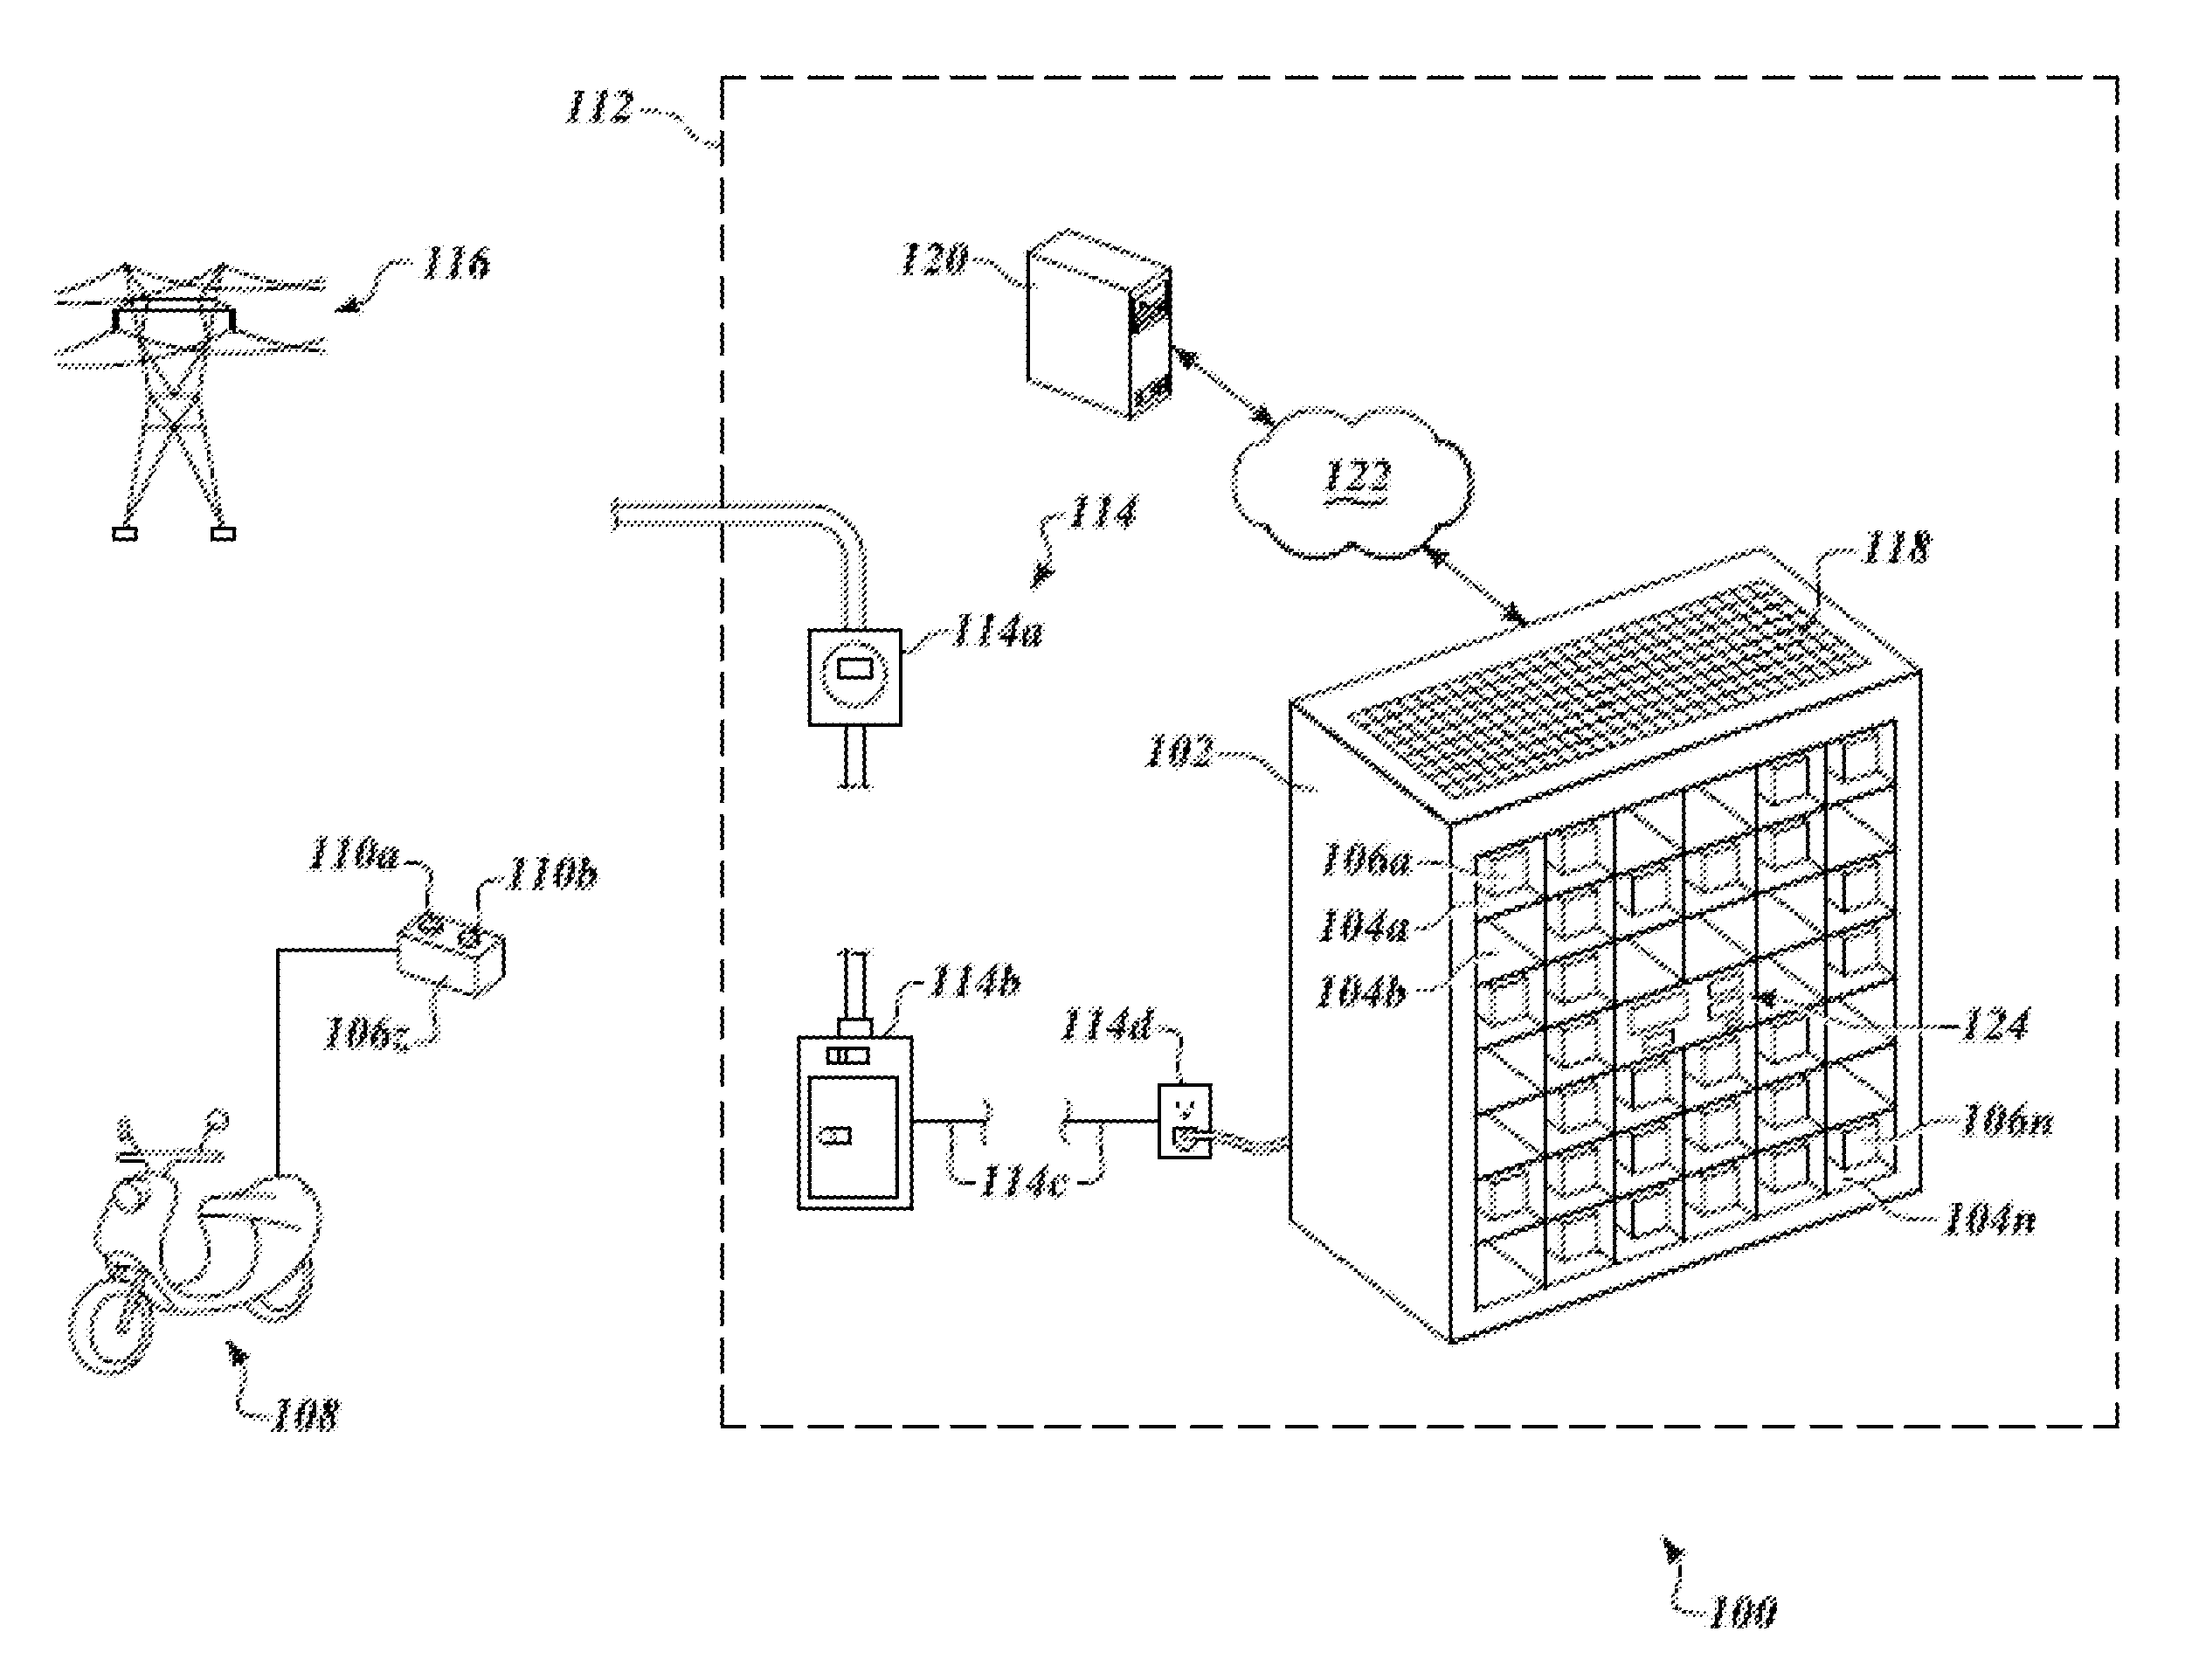 Apparatus, method and article for authentication, security and control of power storage devices, such as batteries, based on user profiles